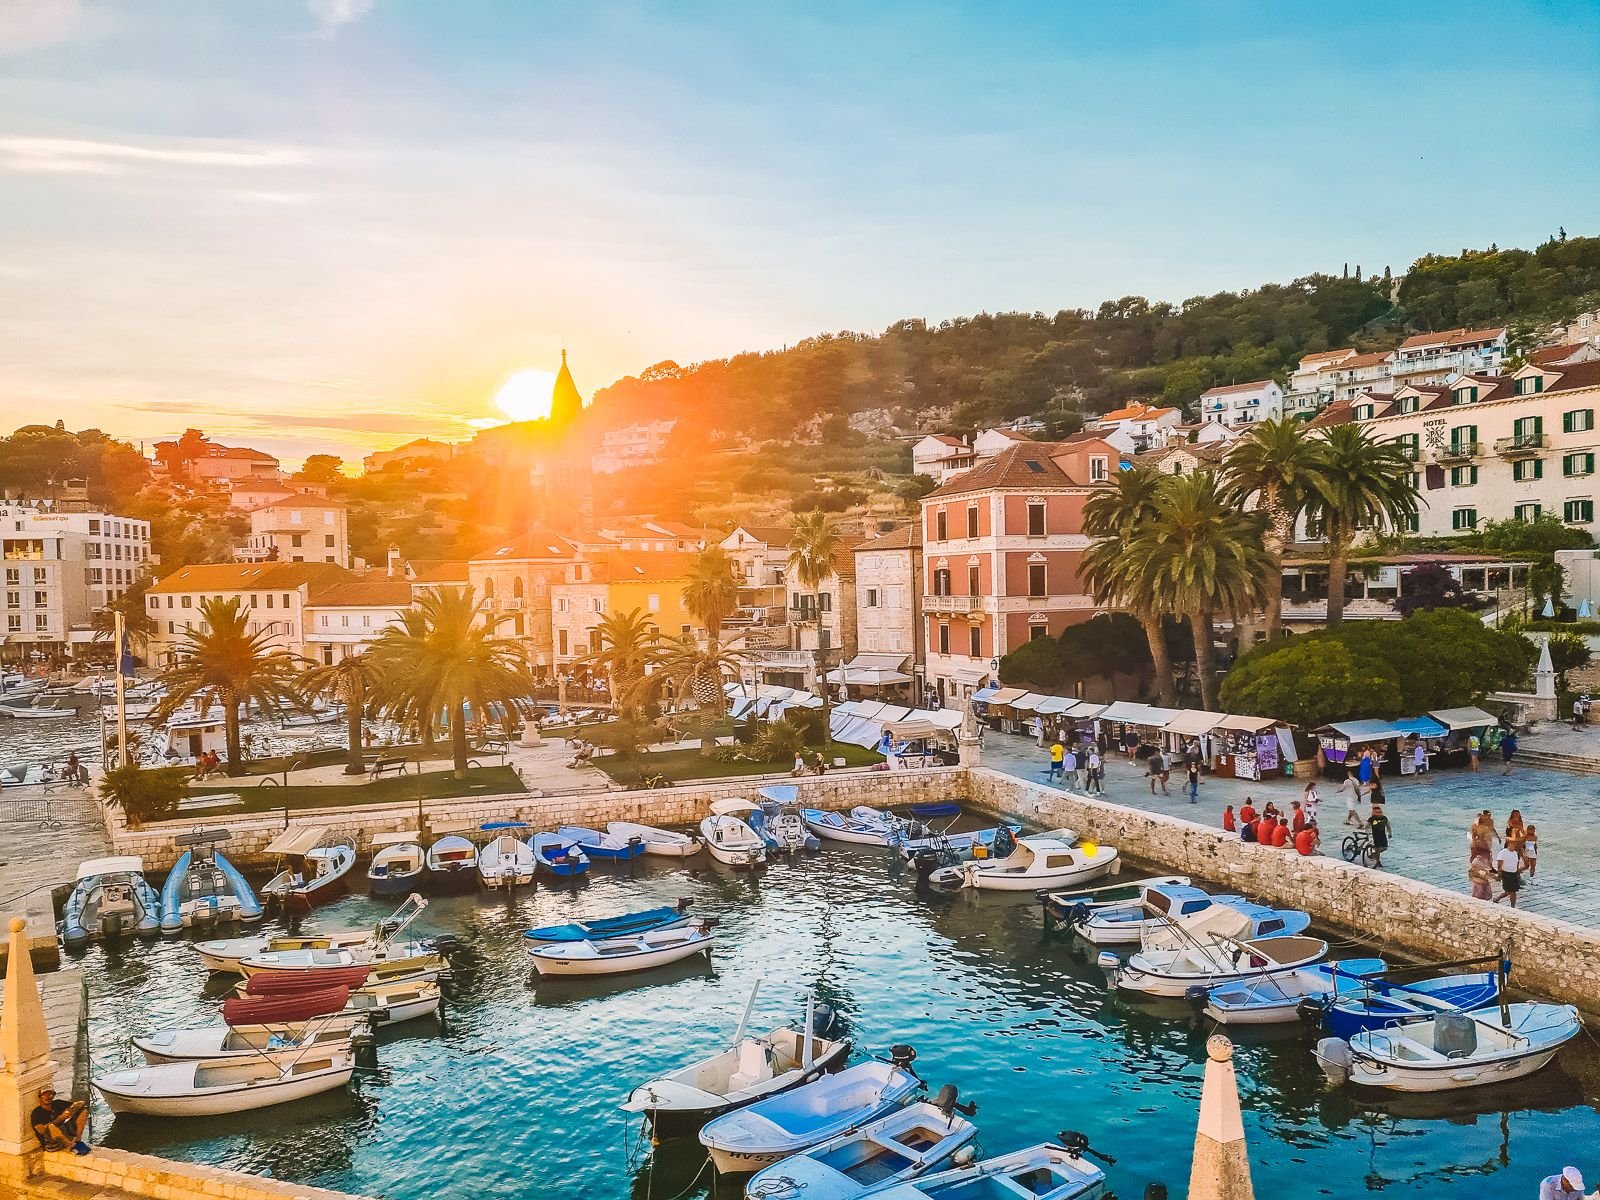 Looking down on a small harbour with boats in at sunset. Sun is setting between the hills in the distance and the hillside is covered in colourful houses with orange roofs on the island of Hvar, Croatia